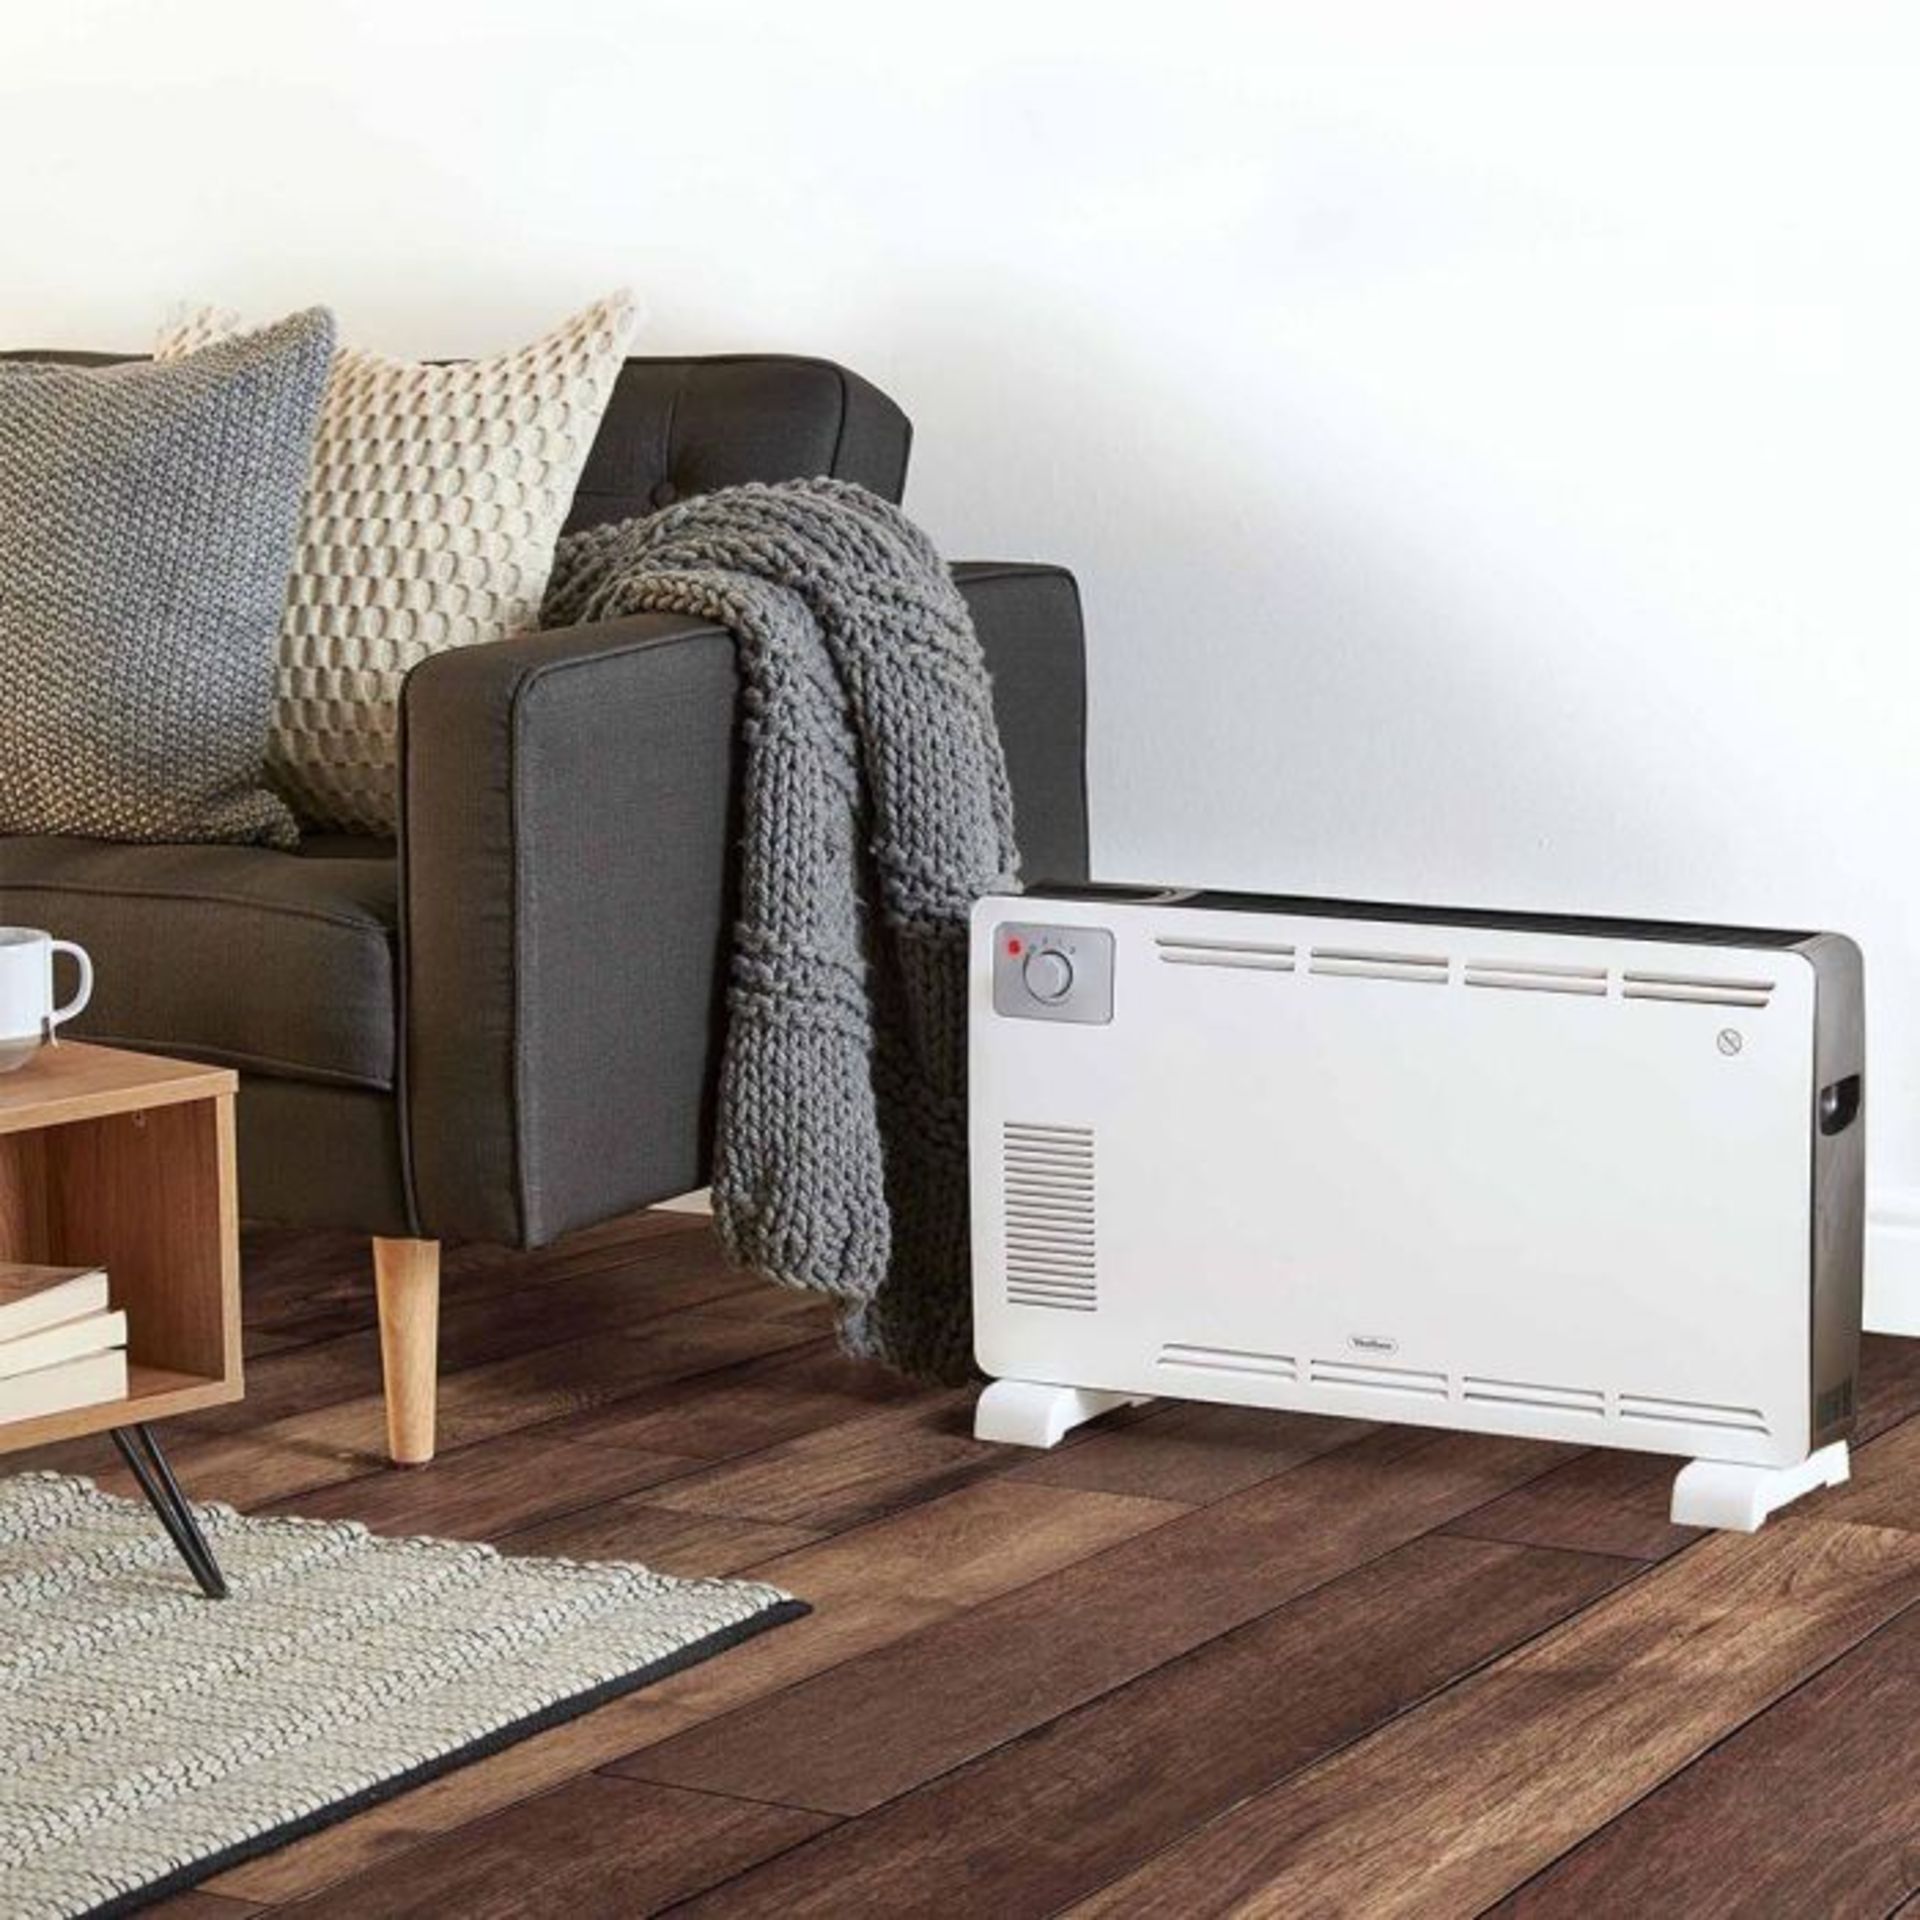 2000W Convector Heater - White. This convector heats up quickly thanks to convection technology. - Image 2 of 3